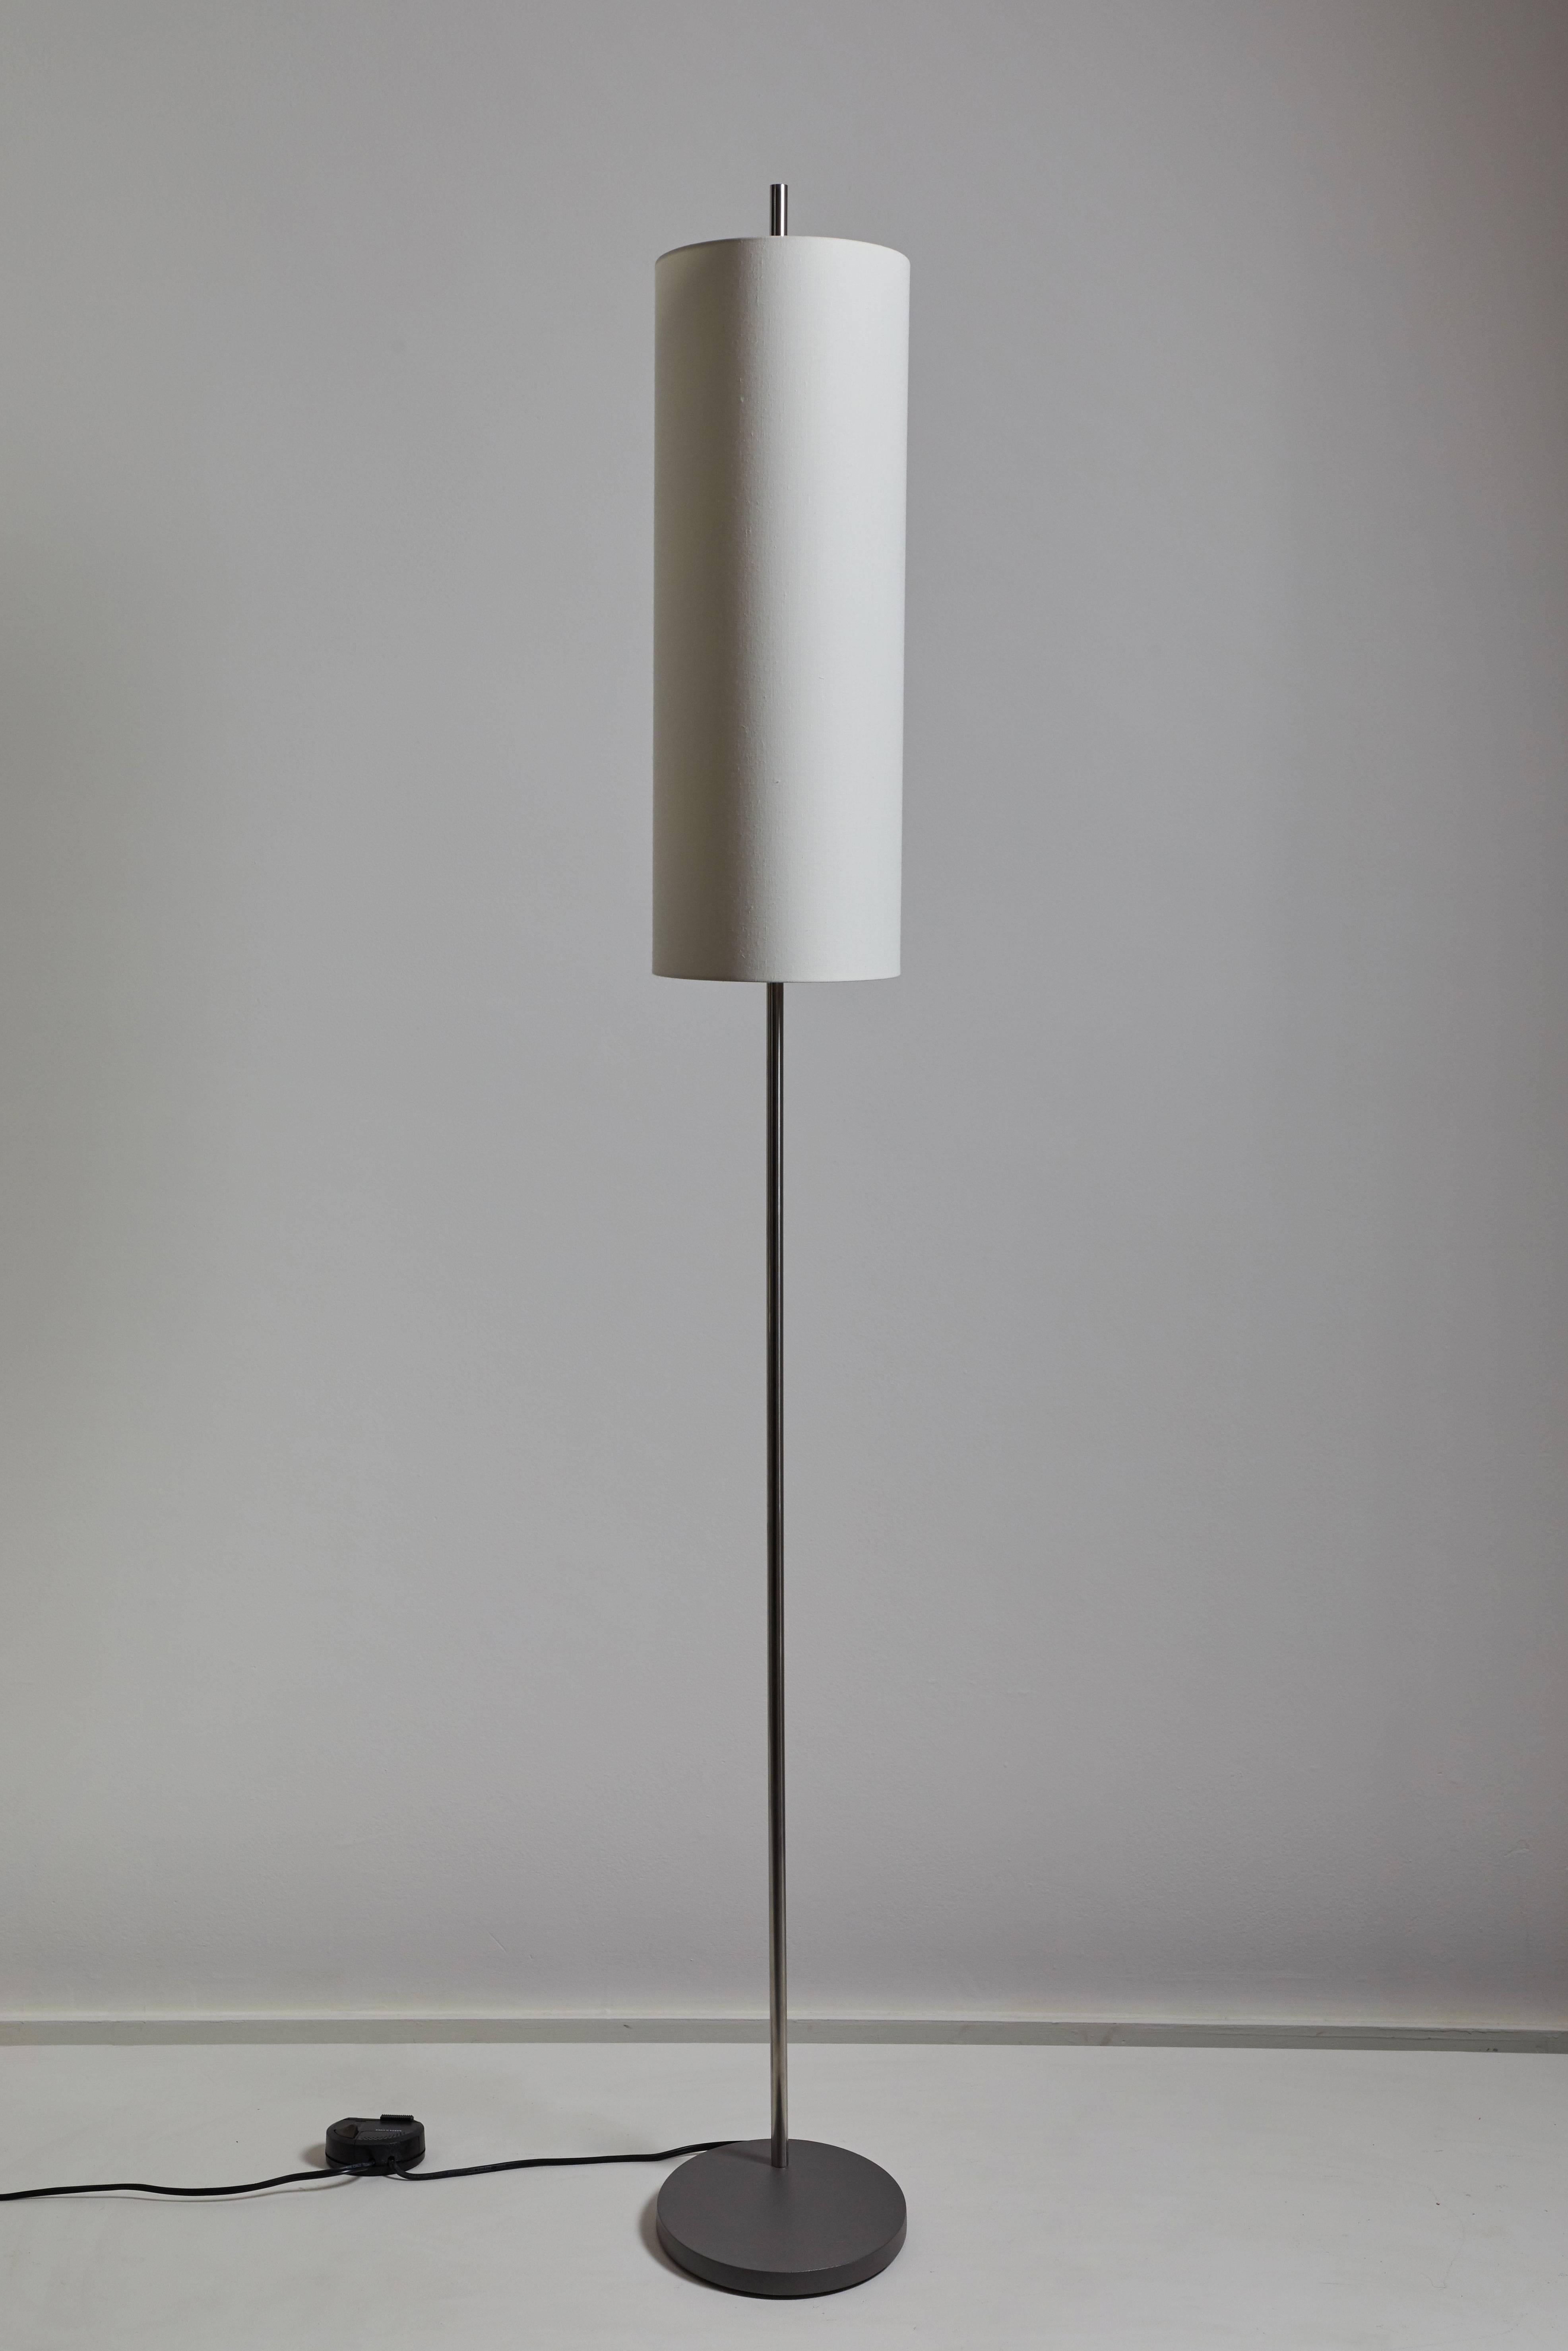 AJ Royal floor lamp by Arne Jacobsen for Santa & Cole. This out of production Light was manufactured in Barcelona, Spain. Originally designed for the SAS Royal Hotel in Copenhagen, the floor lamp combines a polished stainless steel stem and an